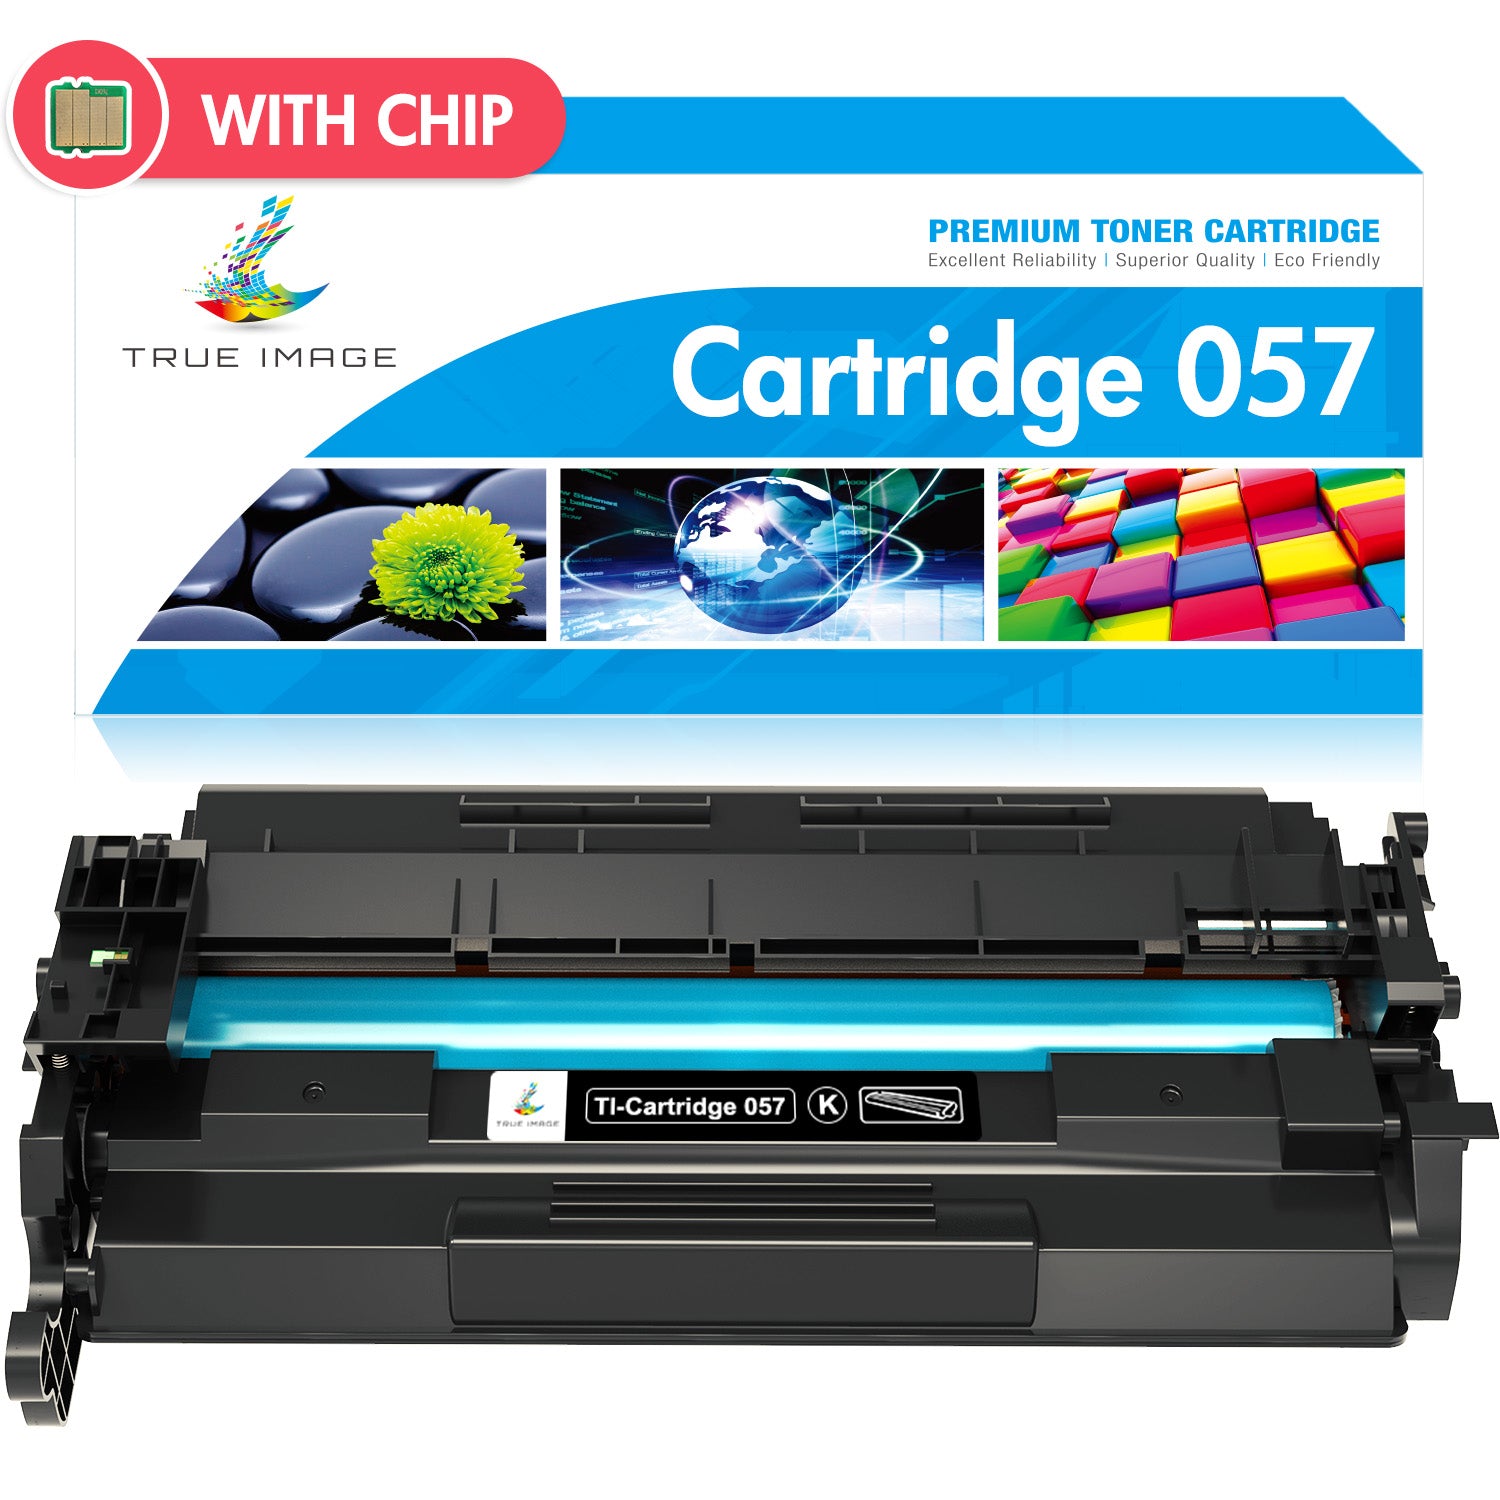 Canon 057 Toner Cartridge With Chip, Can